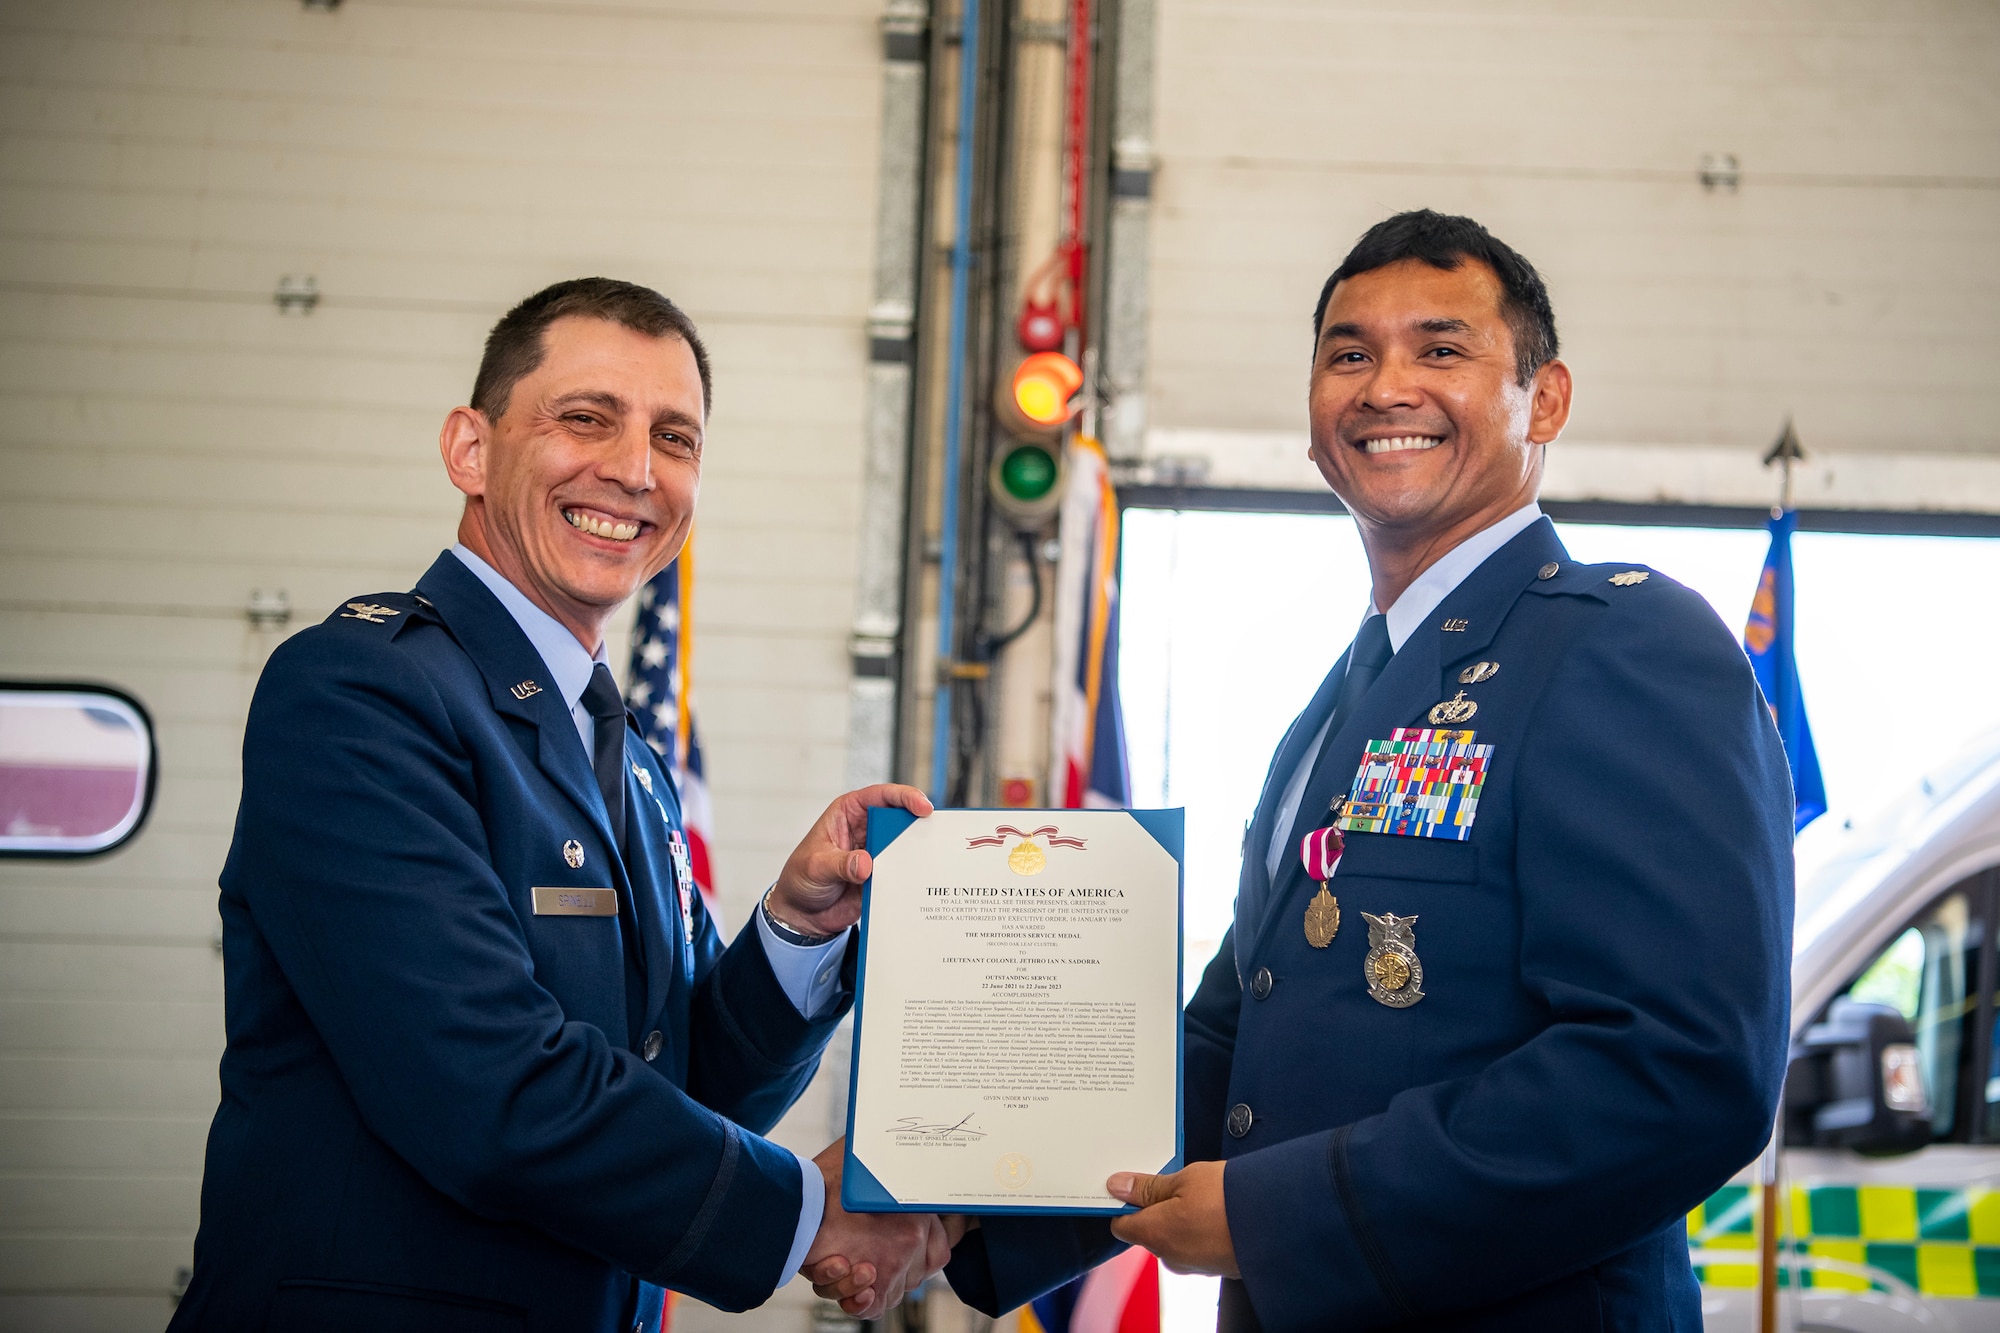 U.S. Air Force Col. Edward Spinelli, left, 422d Air Base Group commander, presents a Meritorious Service Medal decoration to Lt. Col. Jethro Sadora, 422d Civil Engineer Squadron outgoing commander at RAF Croughton, England, June 15, 2023. During his command, Saddora led 155 personnel and was responsible for the construction, maintenance, fire prevention and environmental protection for real property and infrastructure encompassing 787 facilities, spanning 1,205 acres valued at one billion dollars. (U.S. Air Force photo by Staff Sgt. Eugene Oliver)